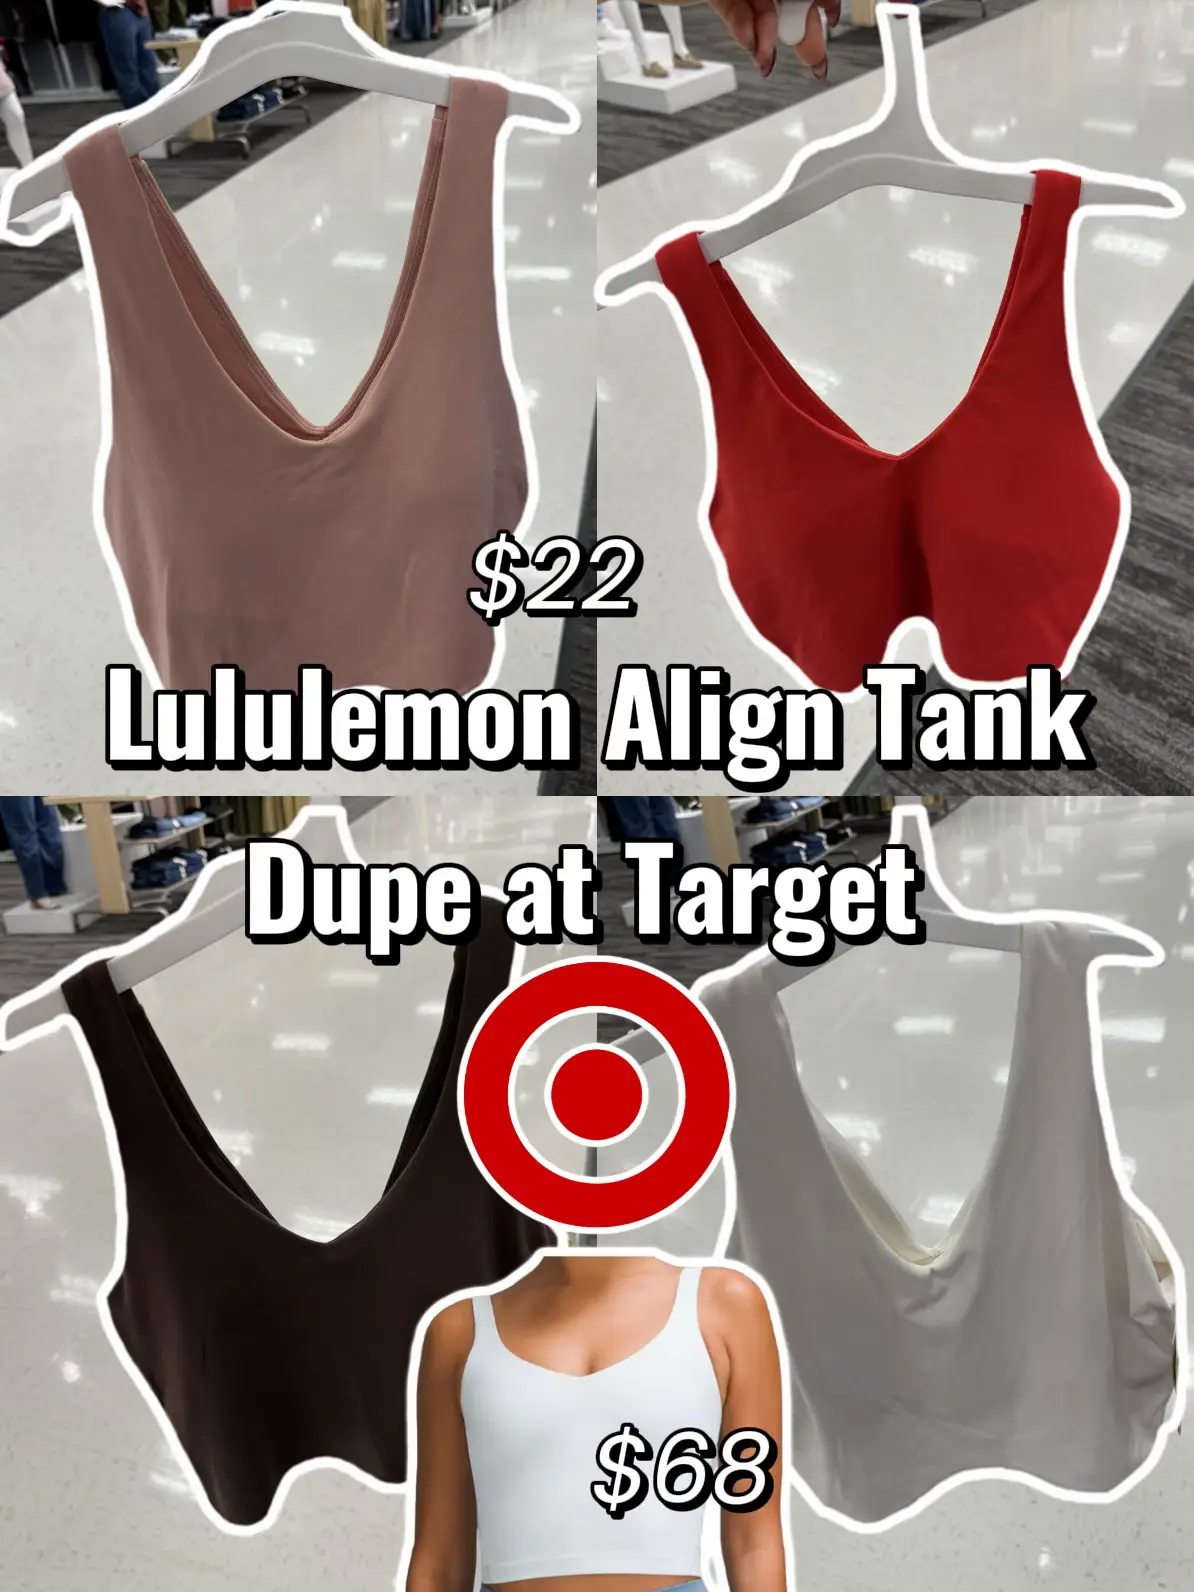 Lululemon Align Tank Dupe at Target, Gallery posted by Lexirosenstein